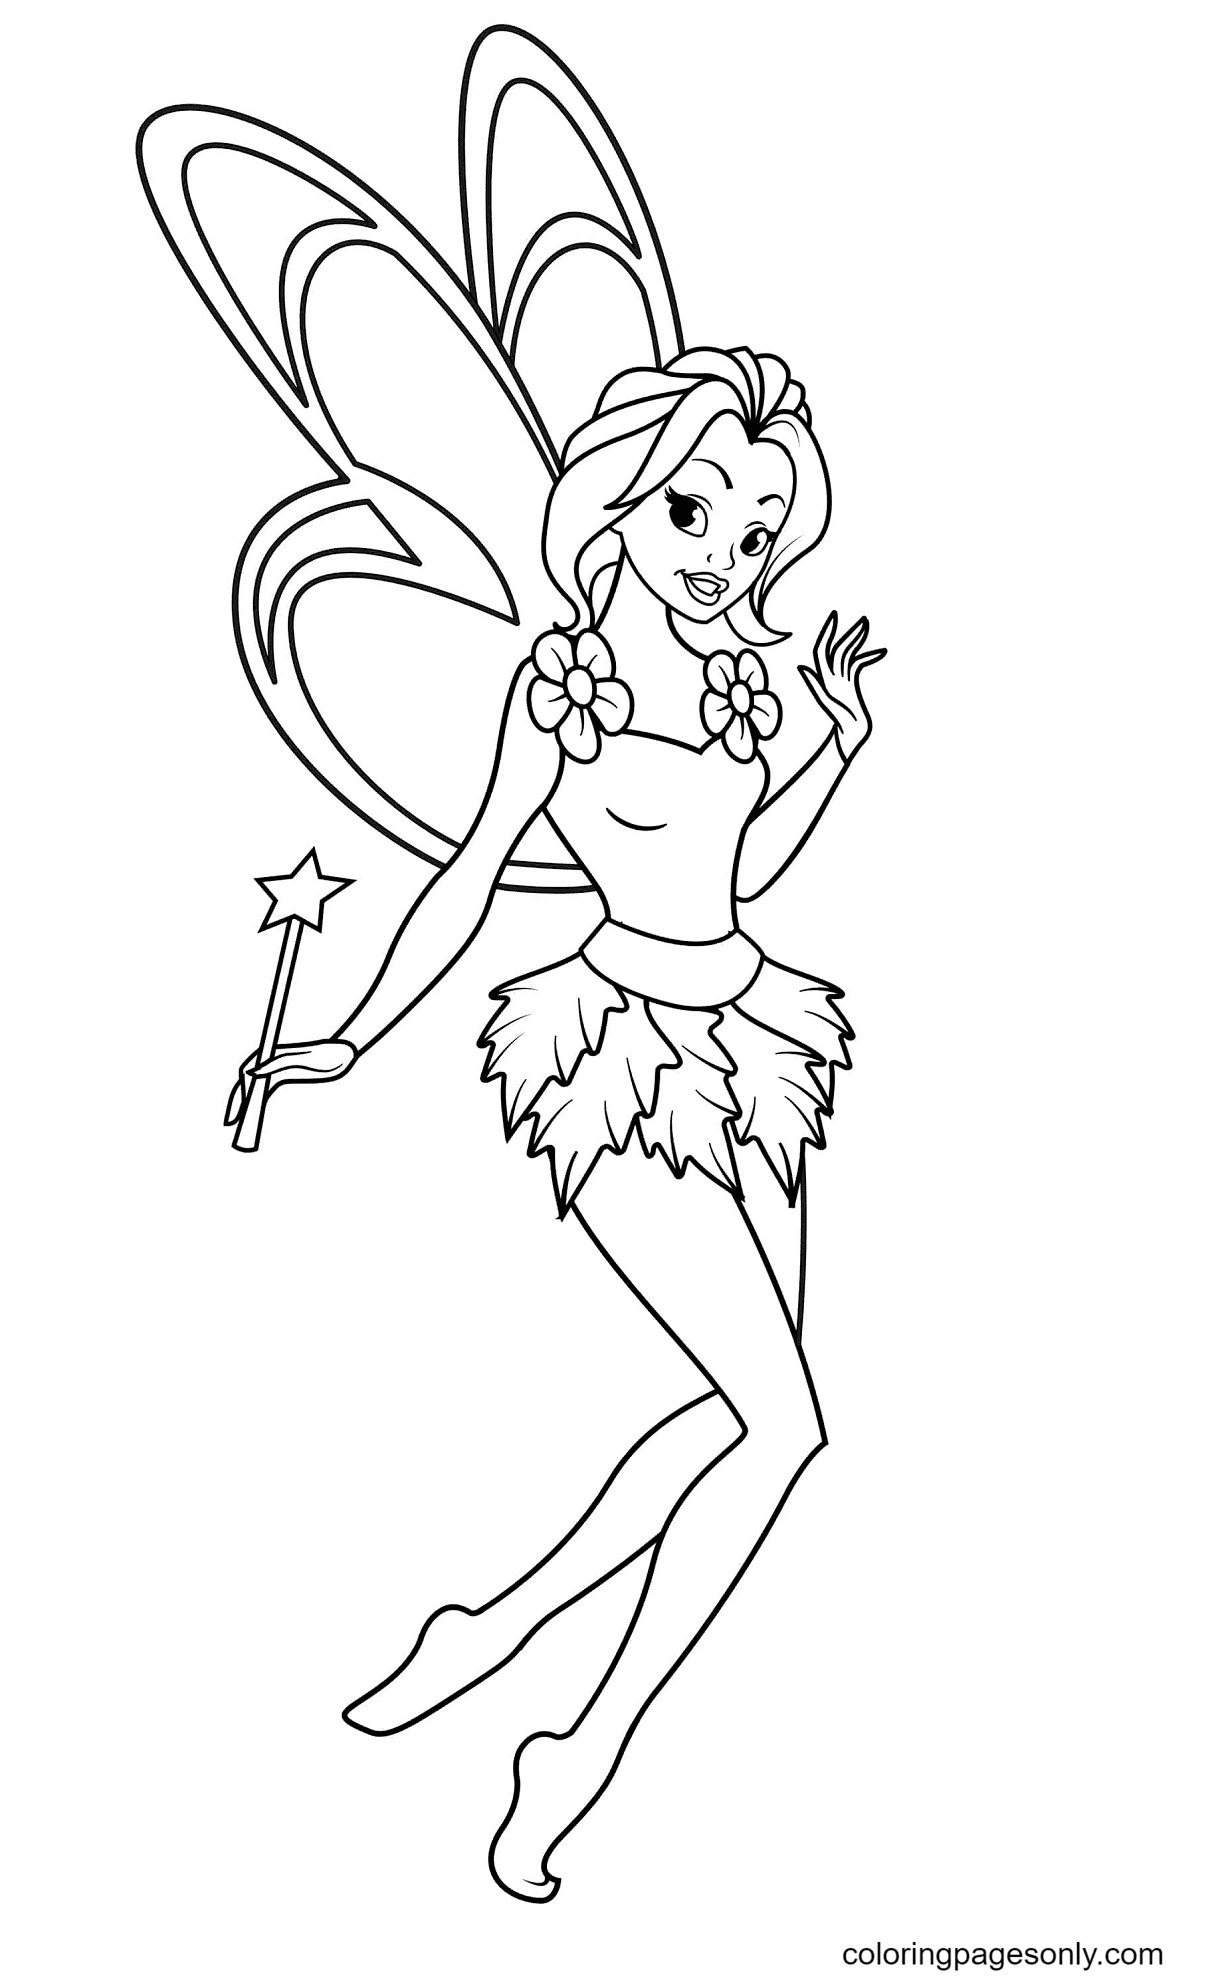 Tinkerbell in Flight Coloring Pages